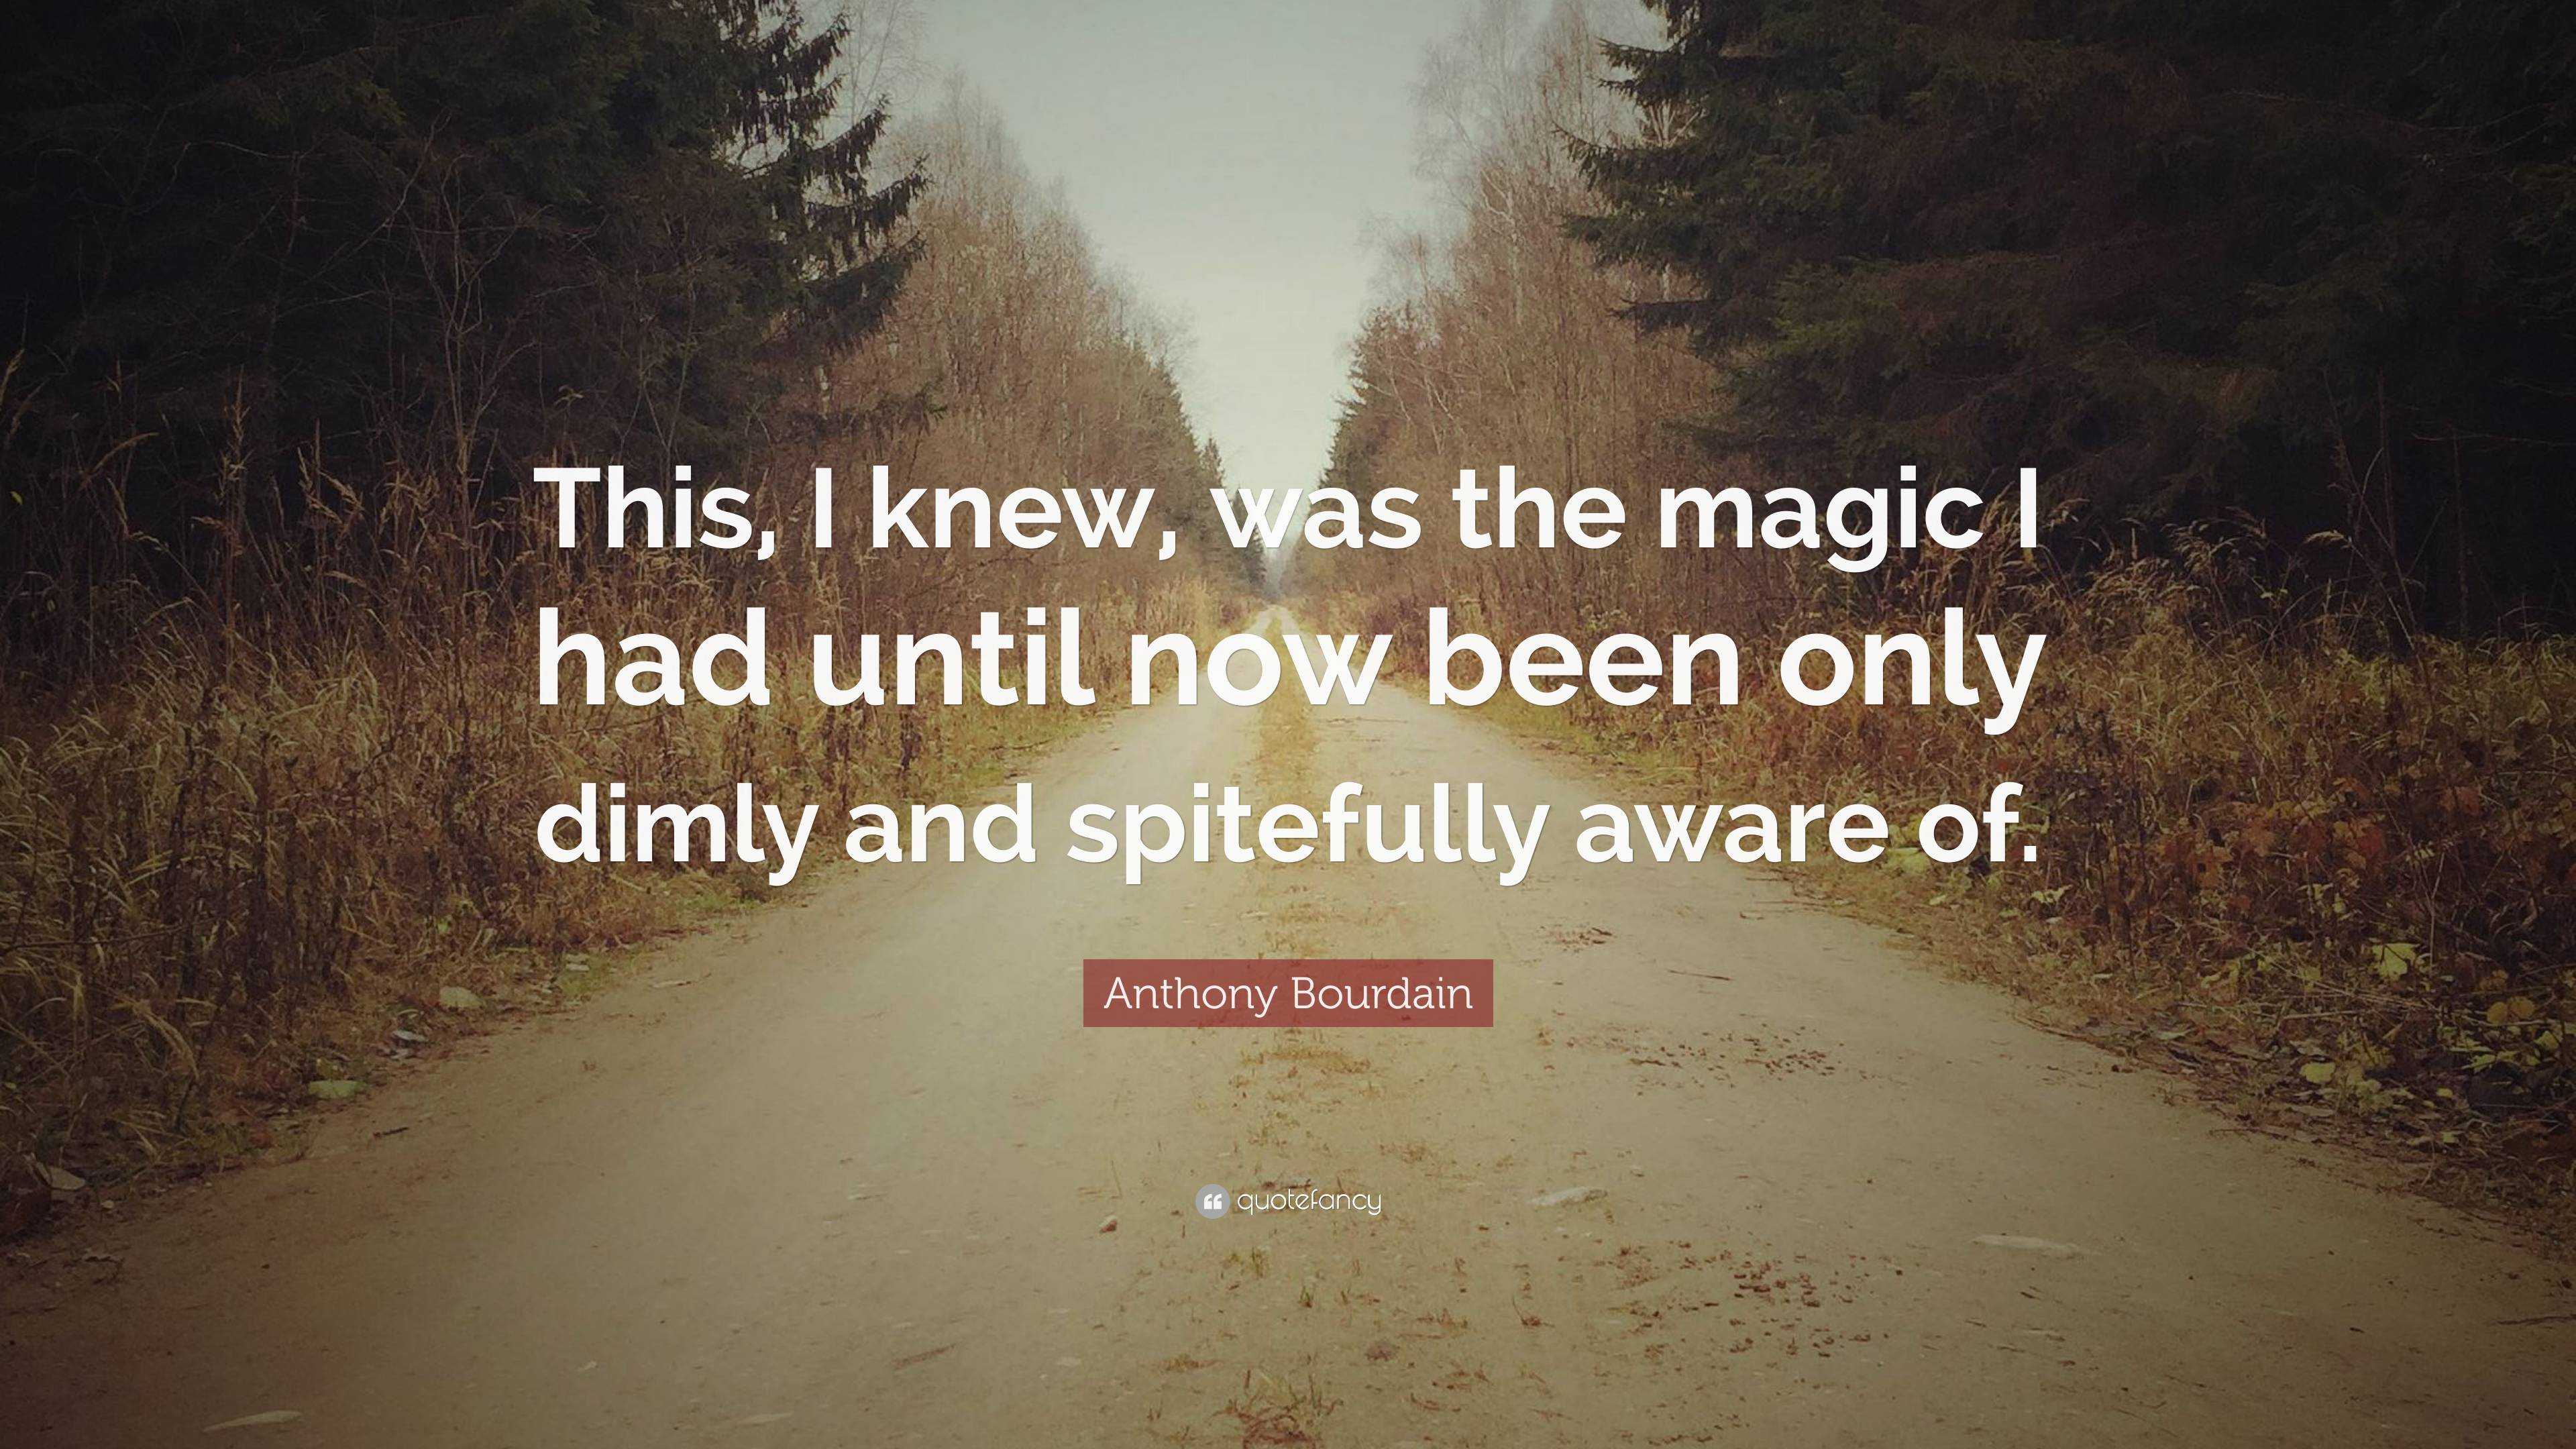 Anthony Bourdain Quote: “This, I knew, was the magic I had until now ...